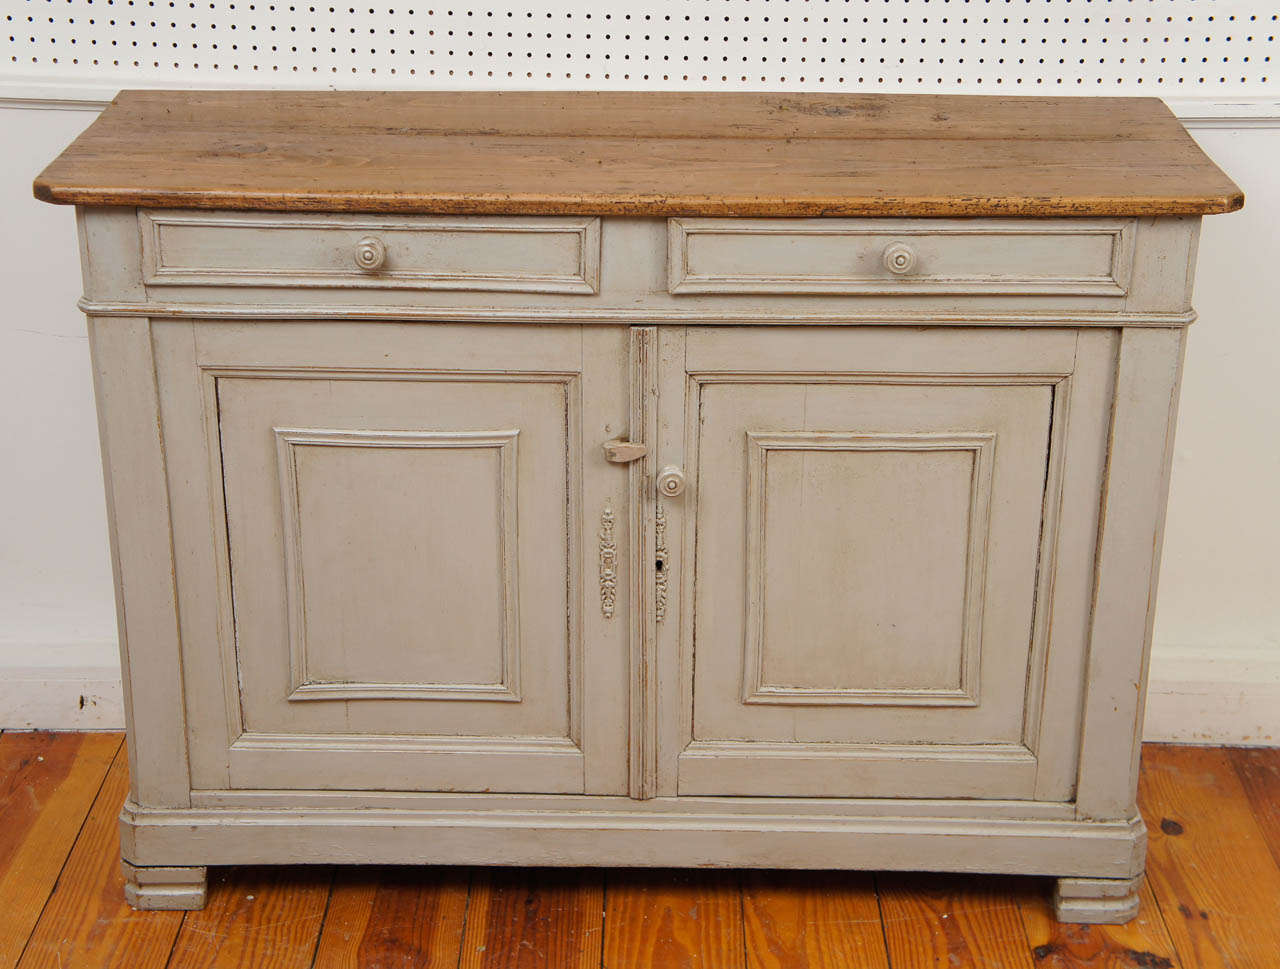 We love a scrubbed pine top along with a gray painted base. They are a handsome combination. Once again the combo does not disappoint on this 1870 French server. The paneled doors and trimmed drawers are delightful. There are two drawers and two